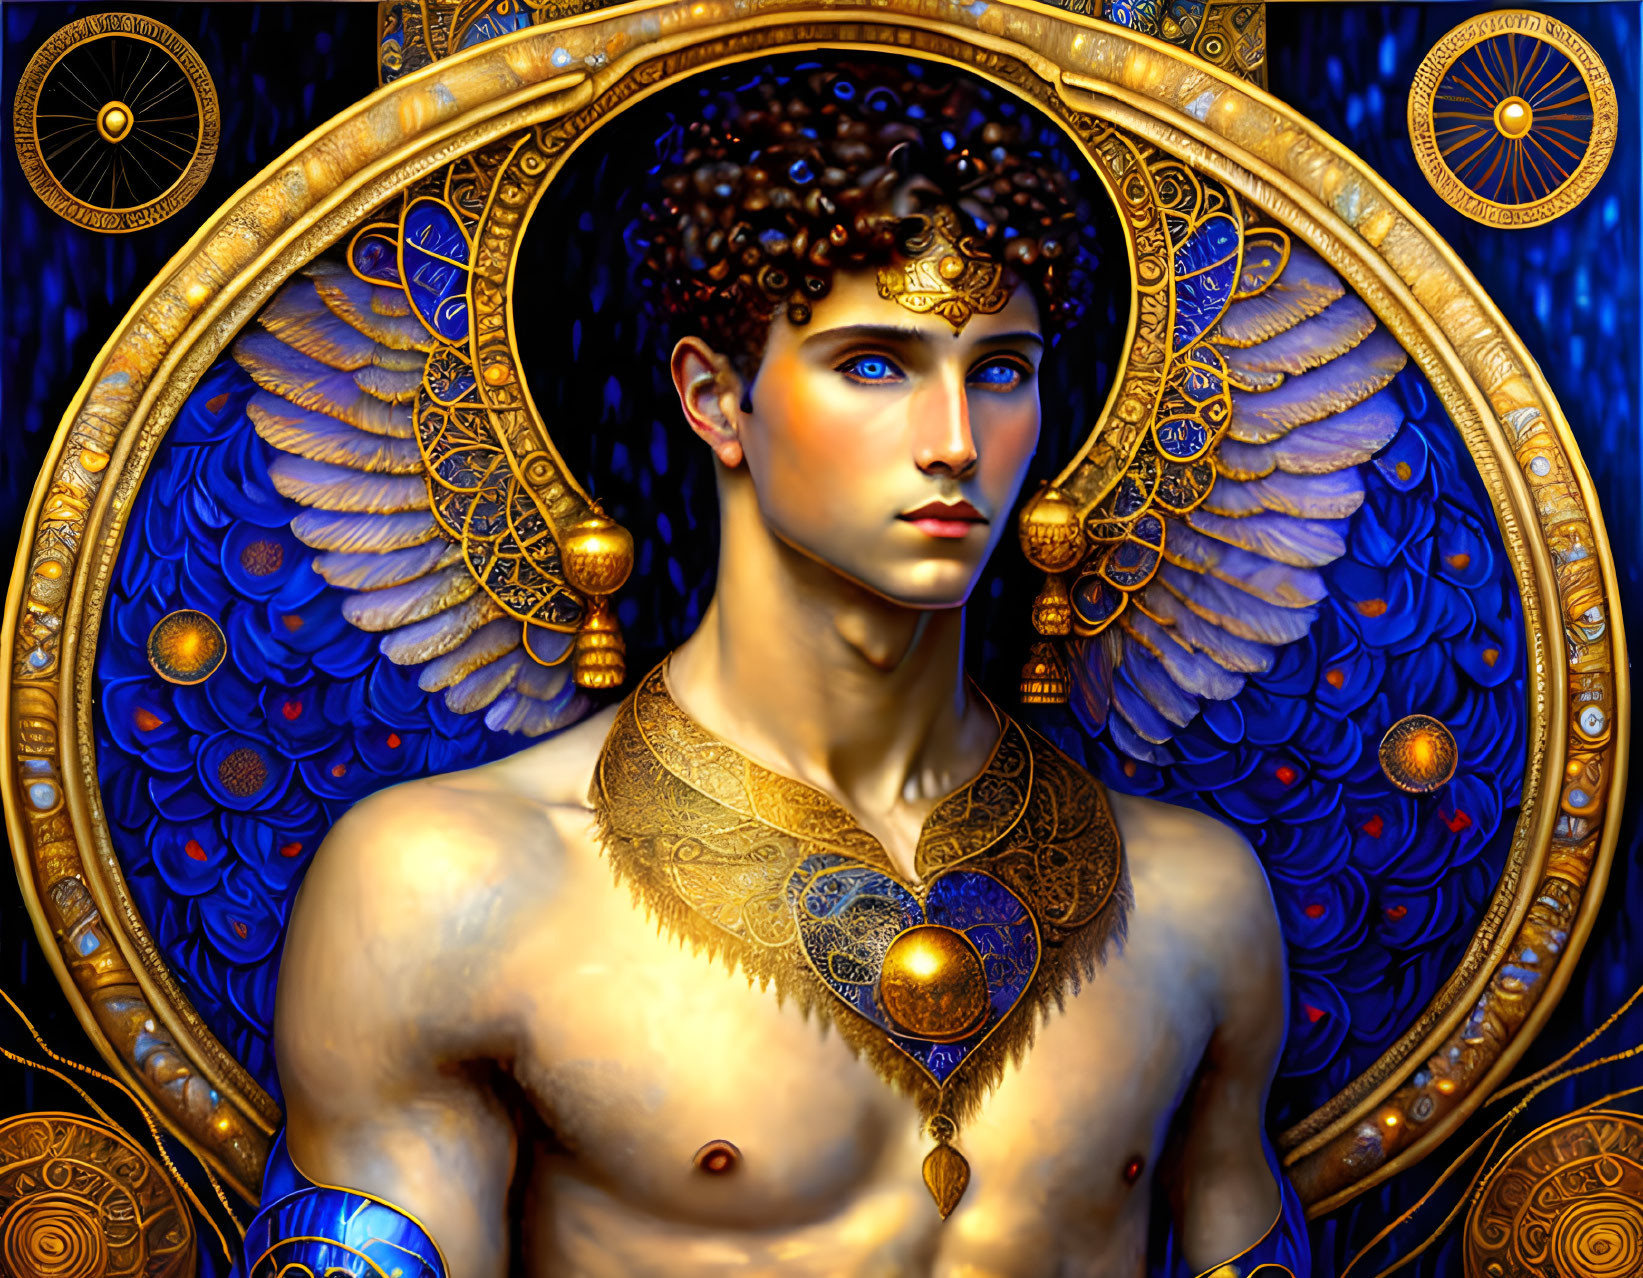 Digital artwork featuring man with angelic wings and ornate jewelry on blue and gold patterned background